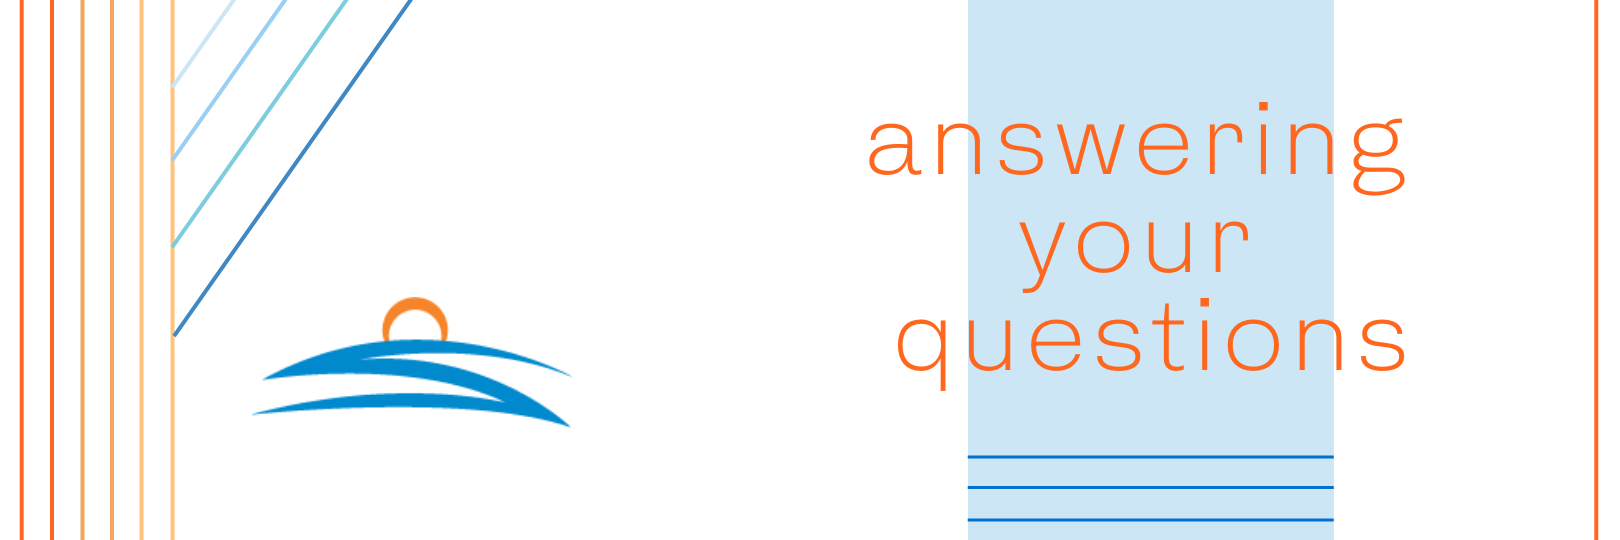 FAQS about your business modem.  SkyLine/SkyBest is here to help you.